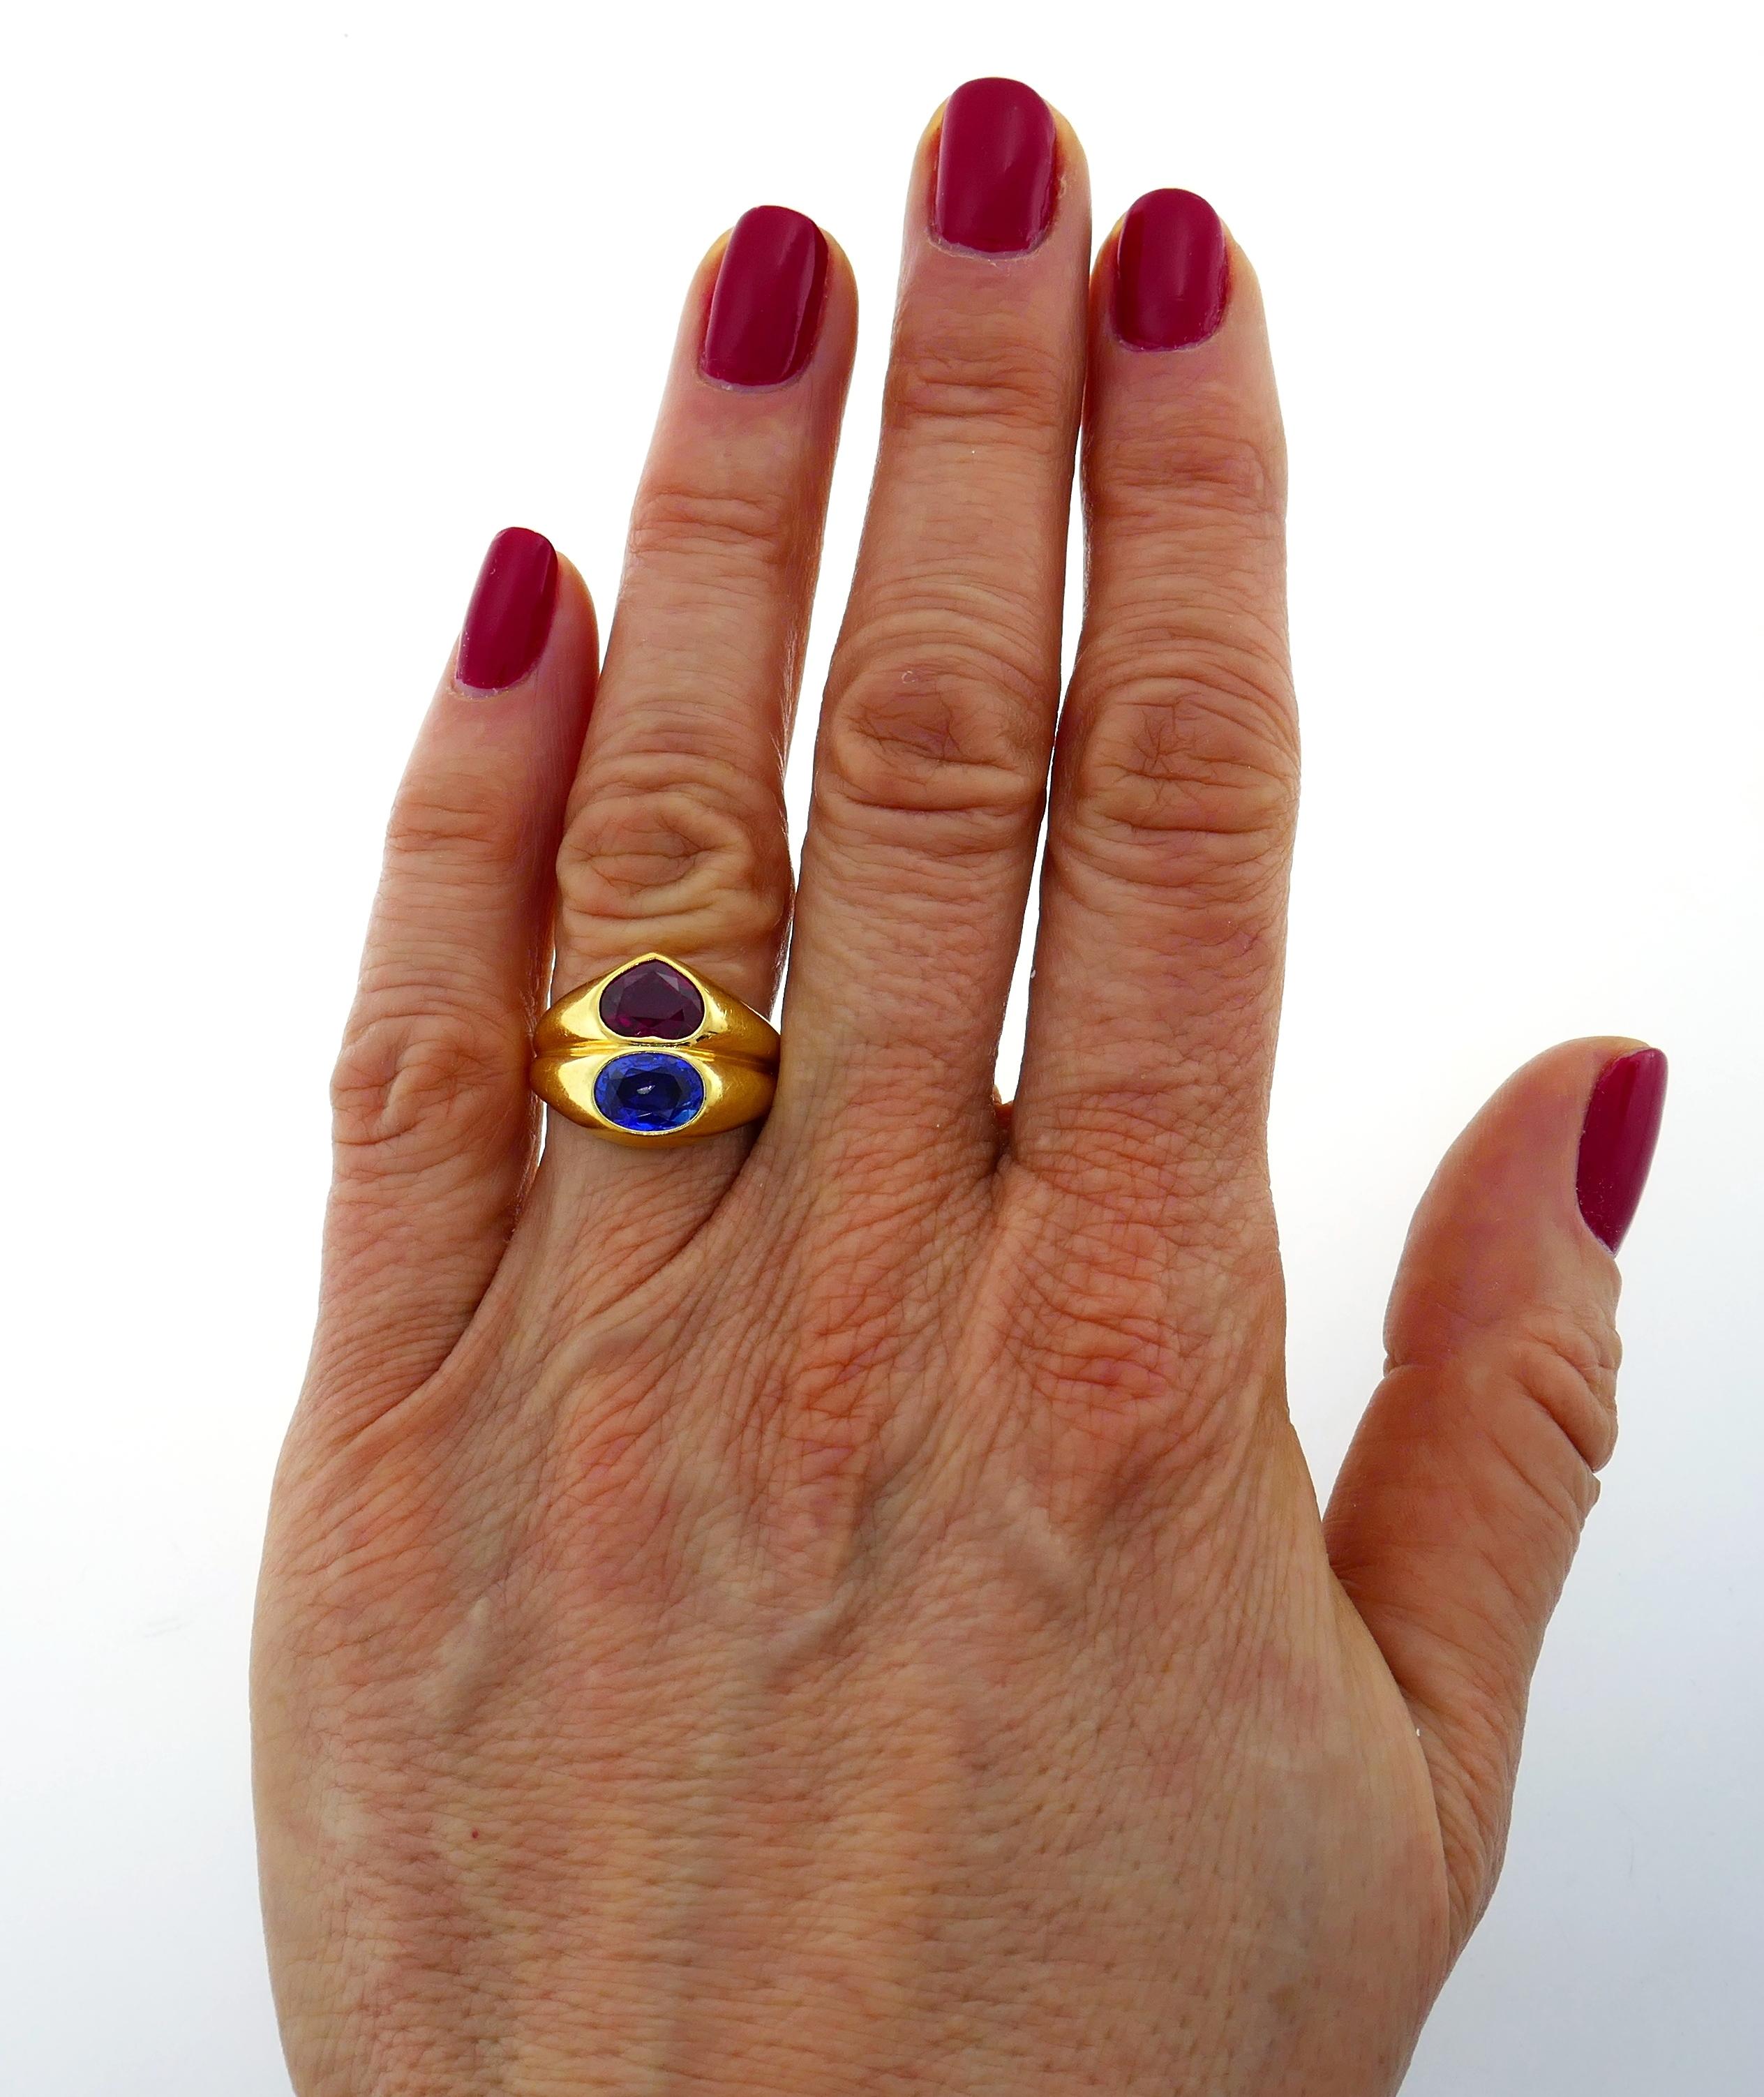 Beautiful Doppio ring created by Bulgari in Italy in the 1980s. Features a 1.69-carat heart-shaped faceted ruby and a 1.57-carat oval faceted sapphire set in 18 karat yellow gold. Timeless, classy and wearable, the ring is a great addition to your